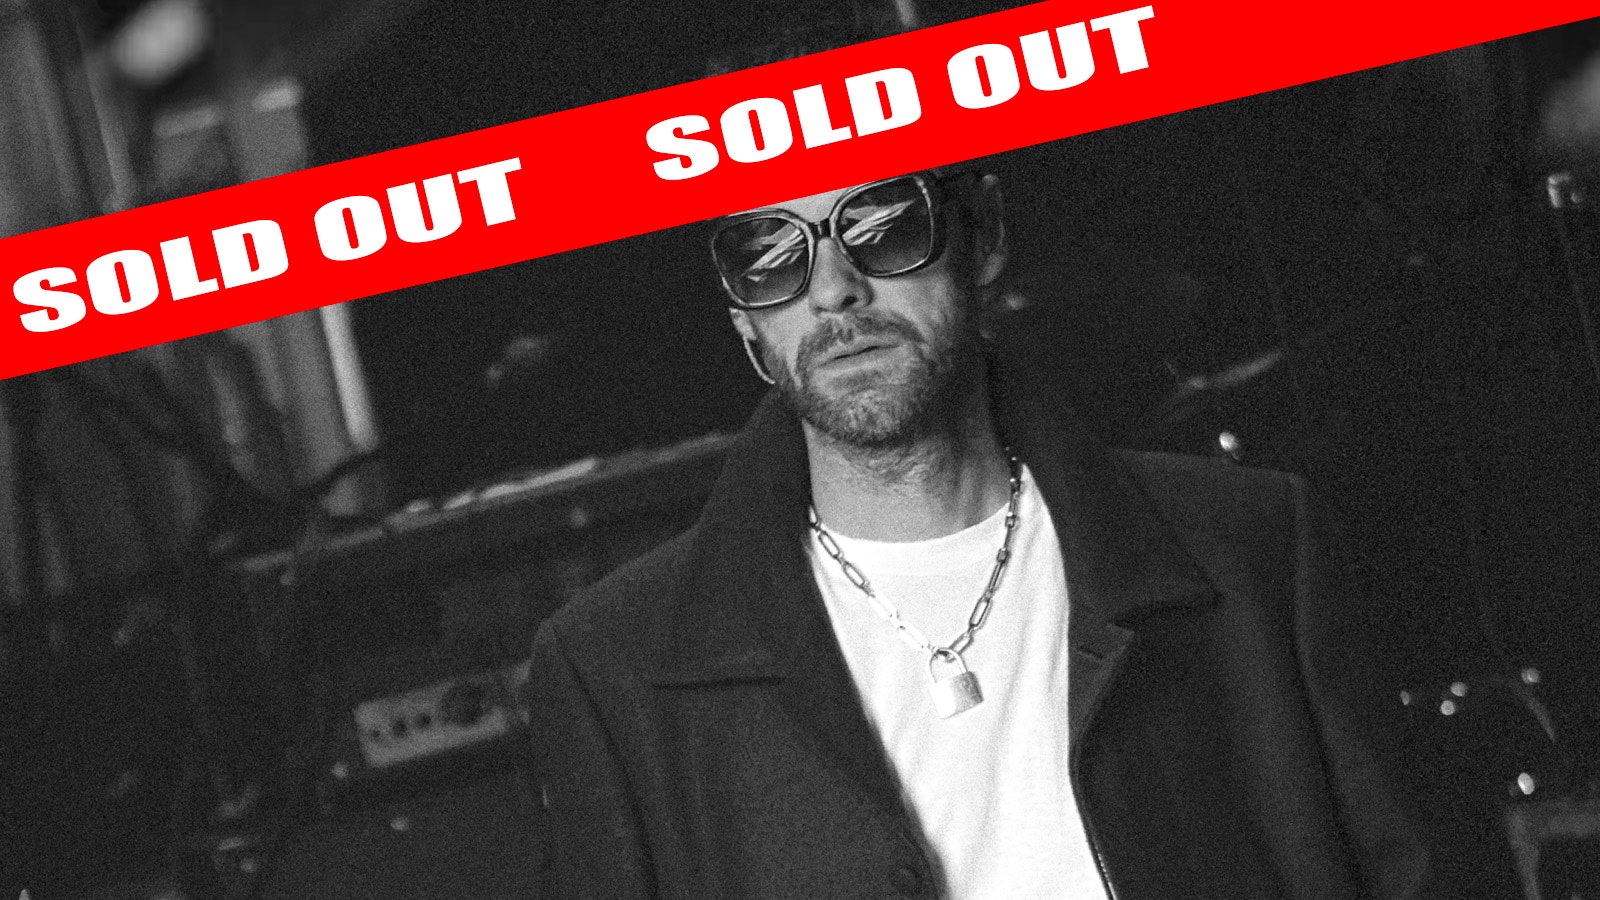 SOLD OUT – TOM MEIGHAN ACOUSTIC SHOW